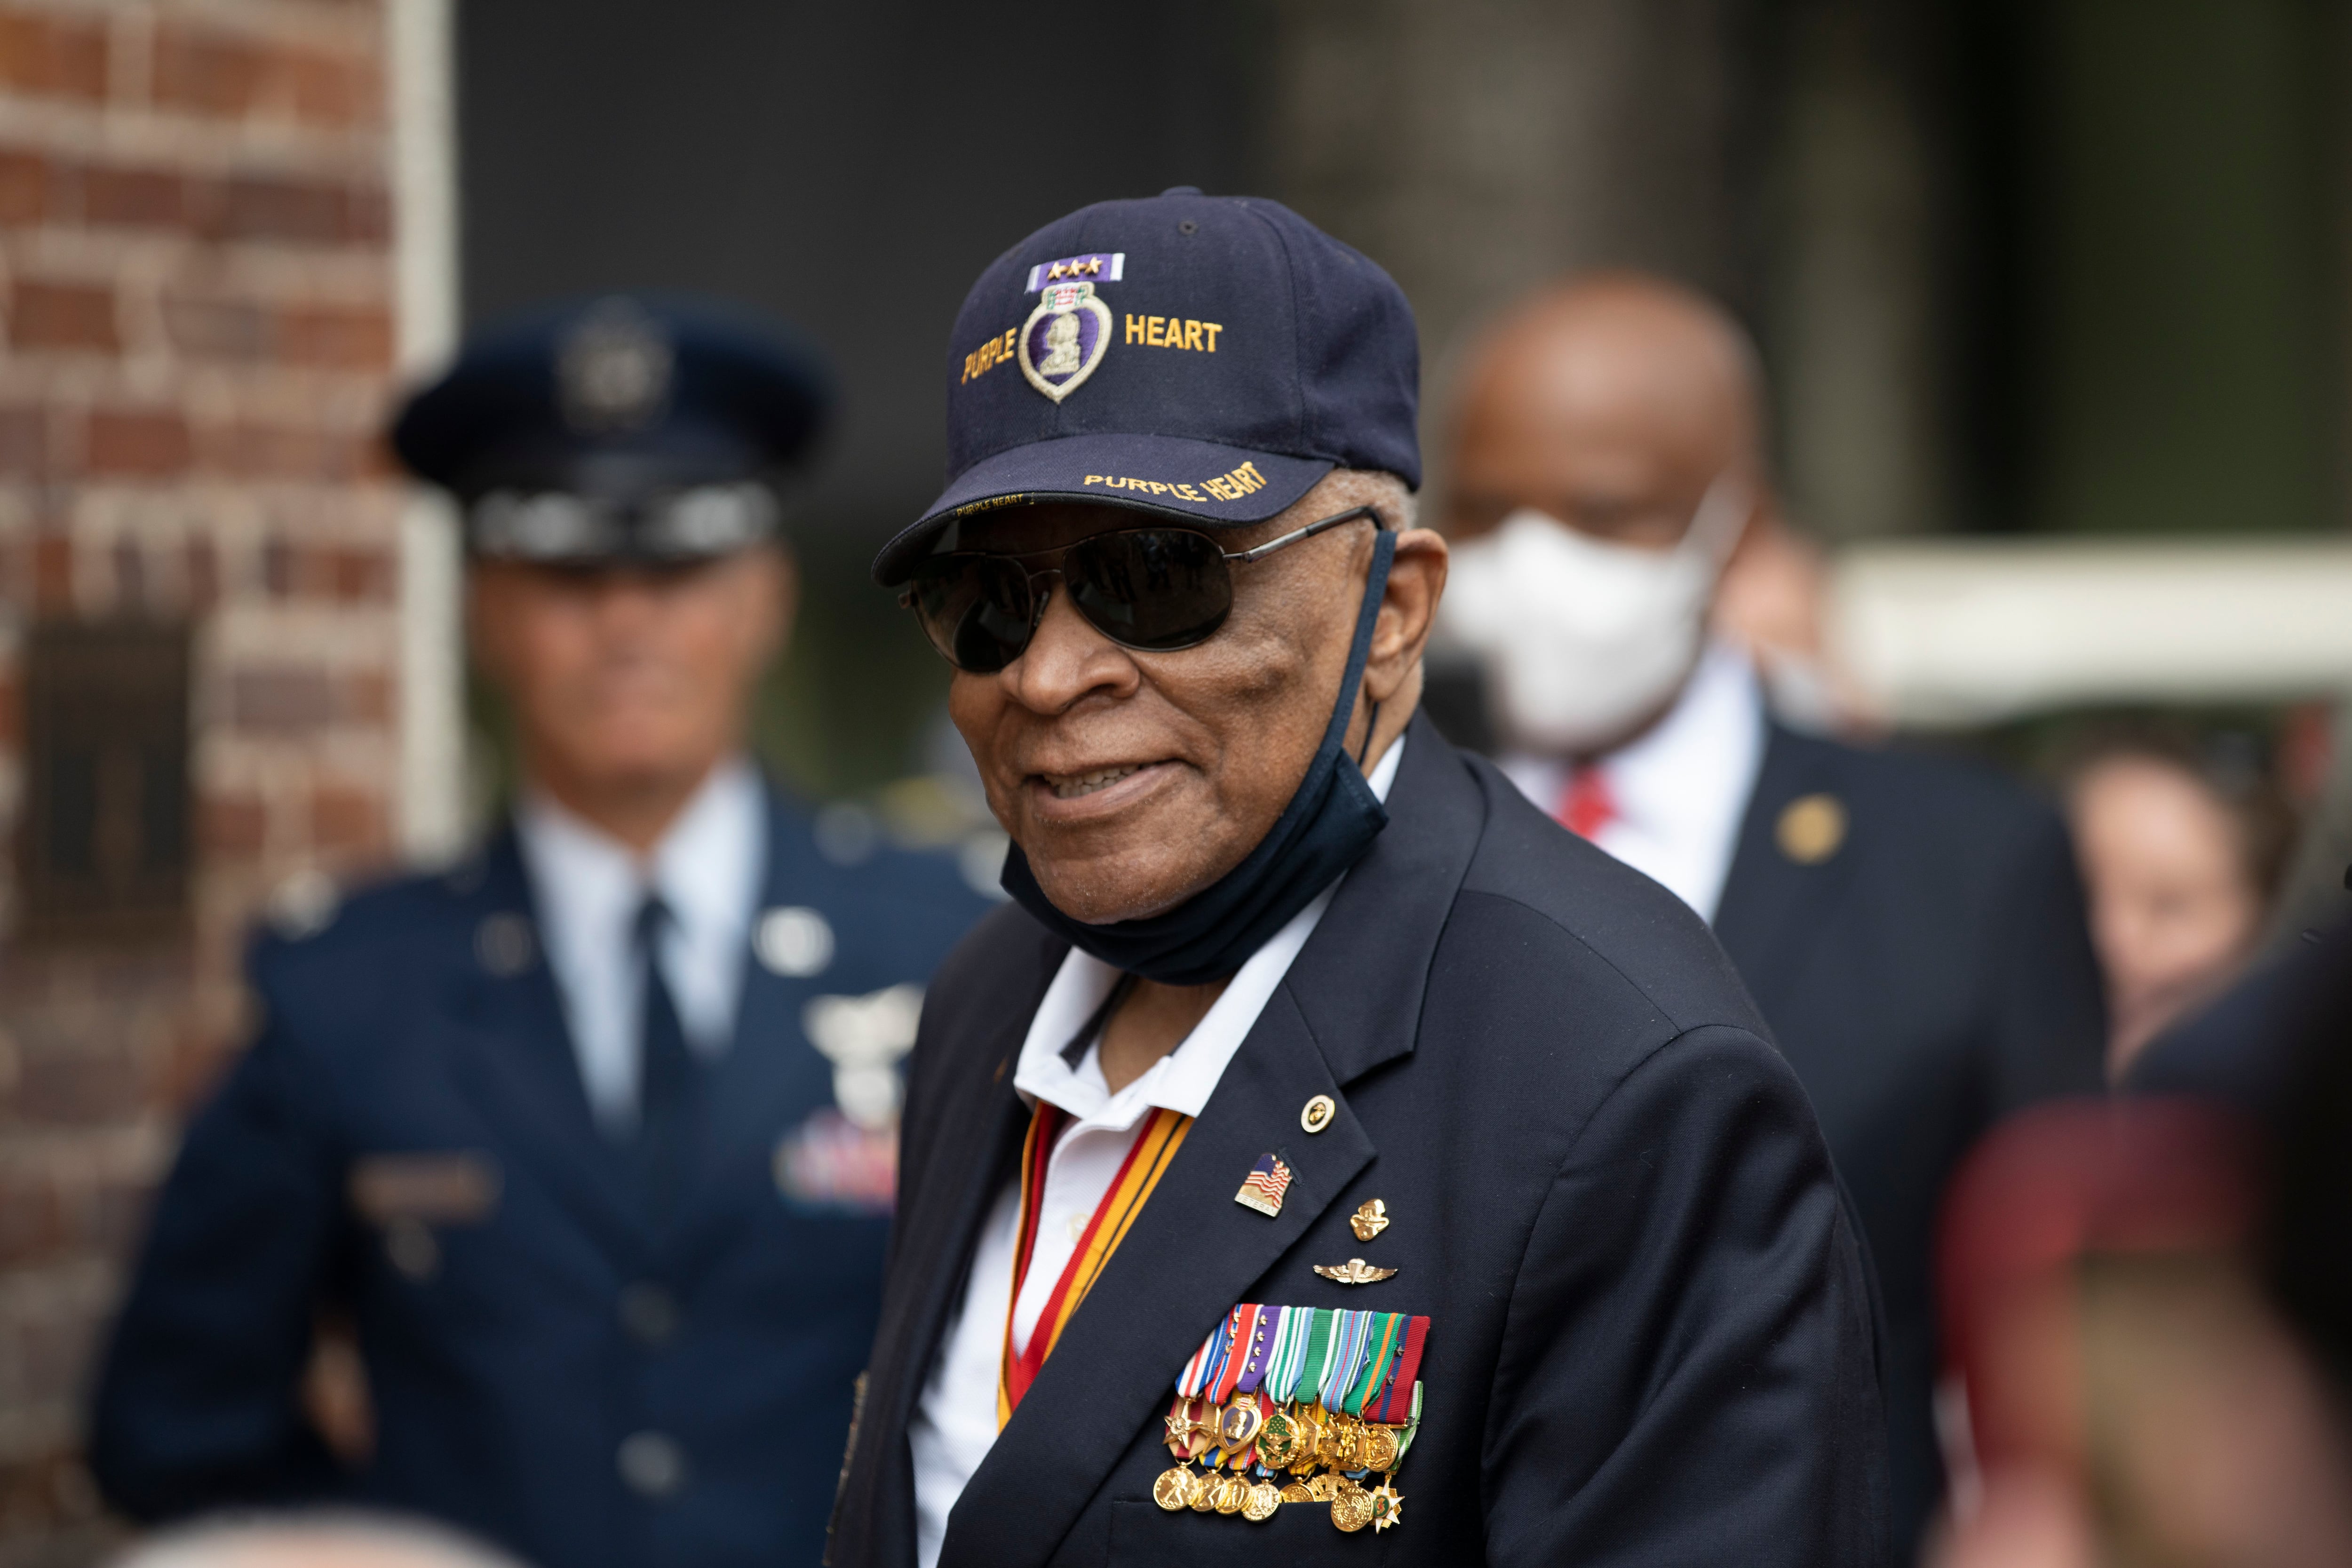 Black Force Recon Marine Battlefield Commission Vietnam War Hero Snubbed For The Medal Of Honor